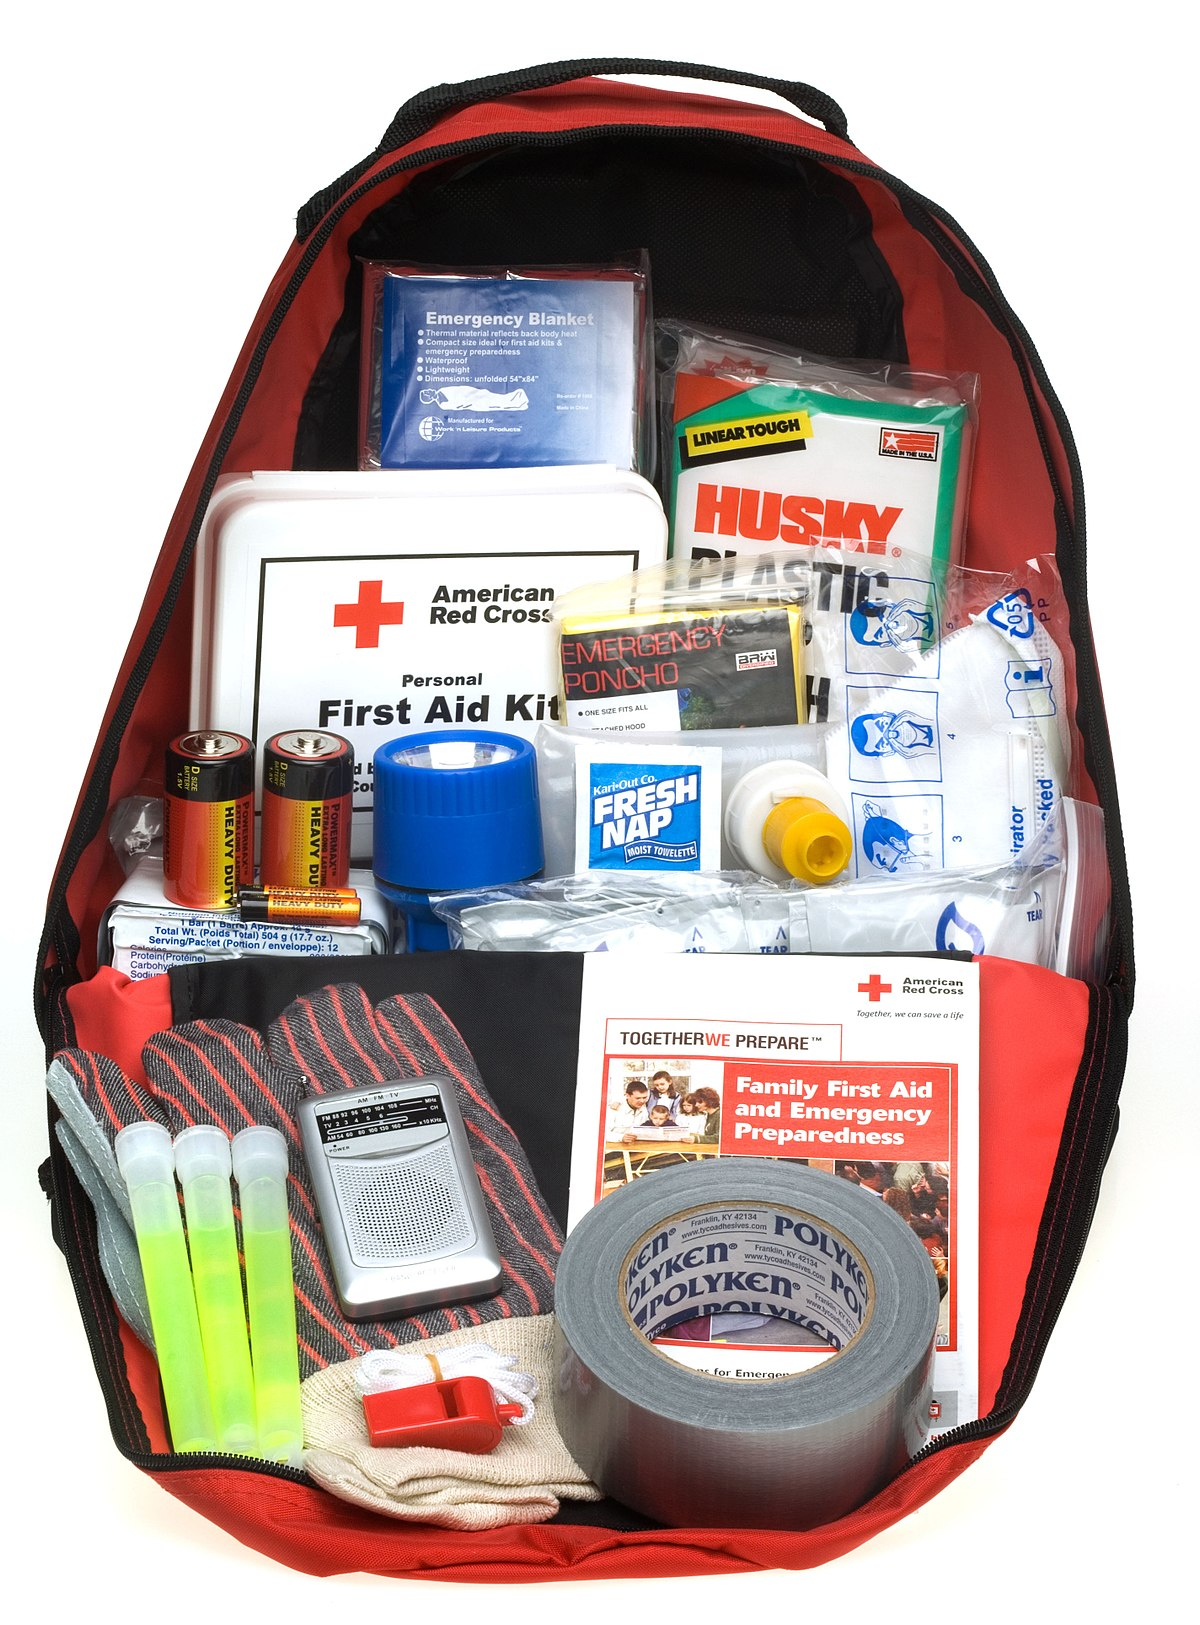 Bug-out bag - Wikipedia Pertaining To First Aid Kit Contents Checklist Template For First Aid Kit Contents Checklist Template